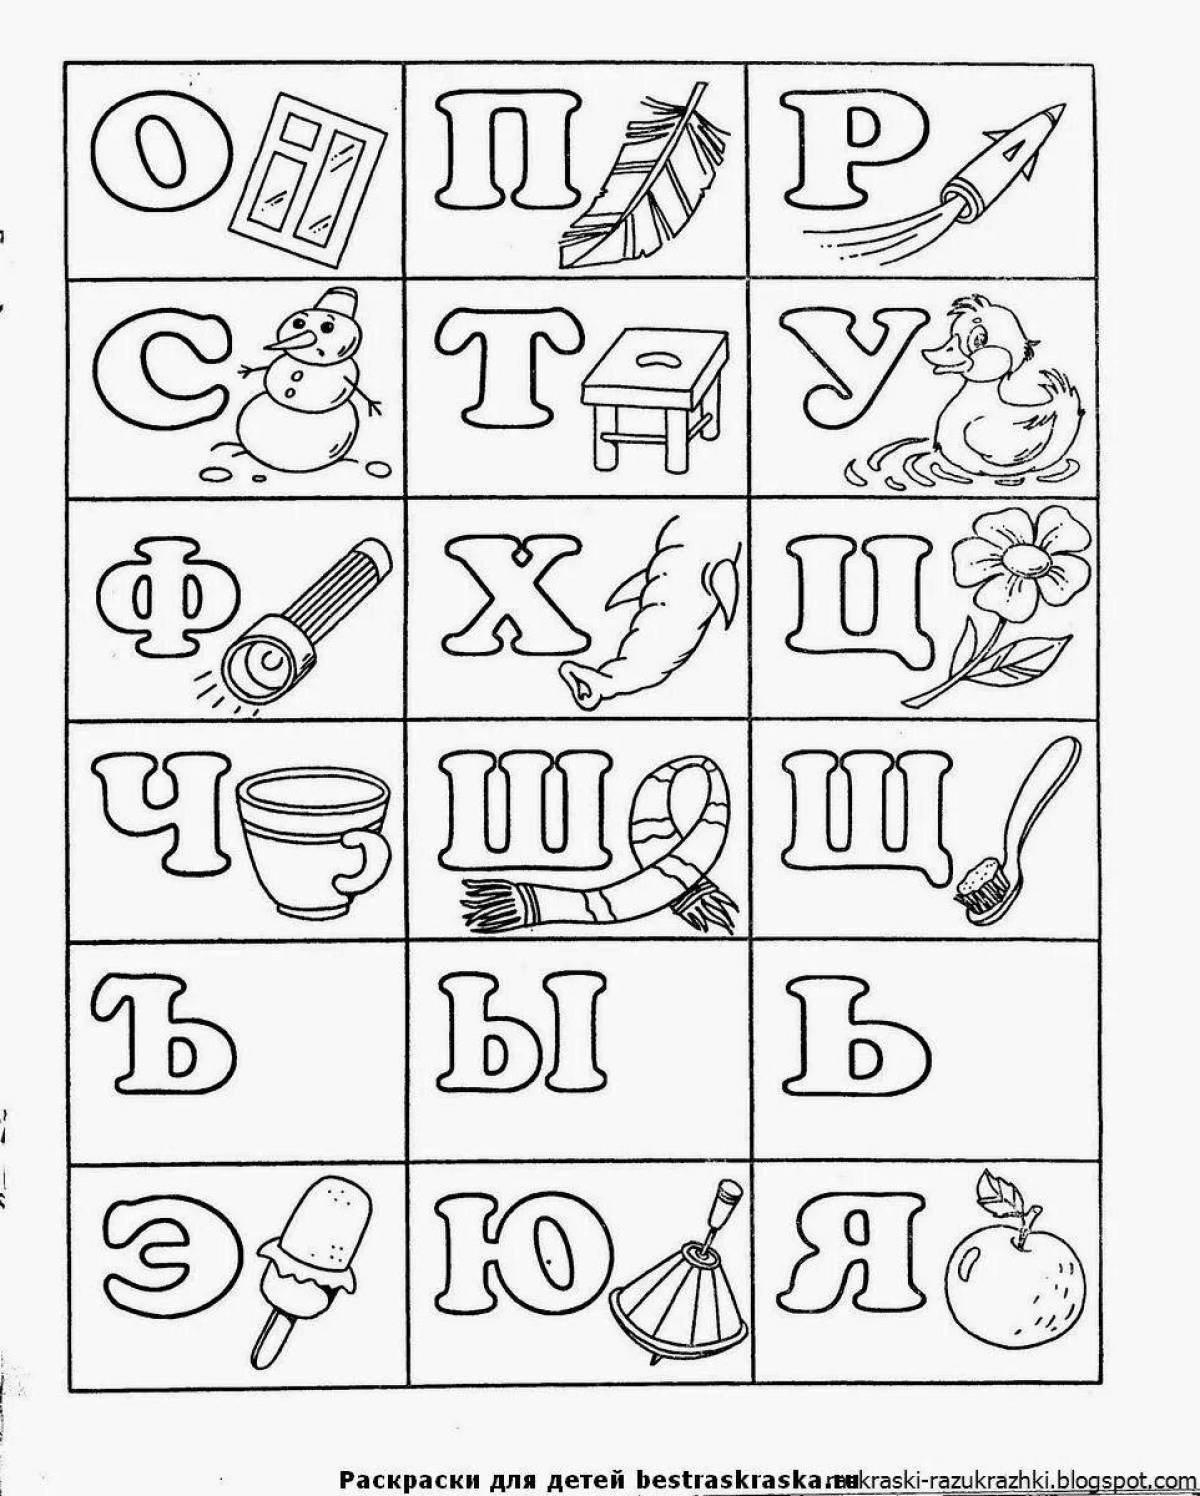 Russian letters for children #8